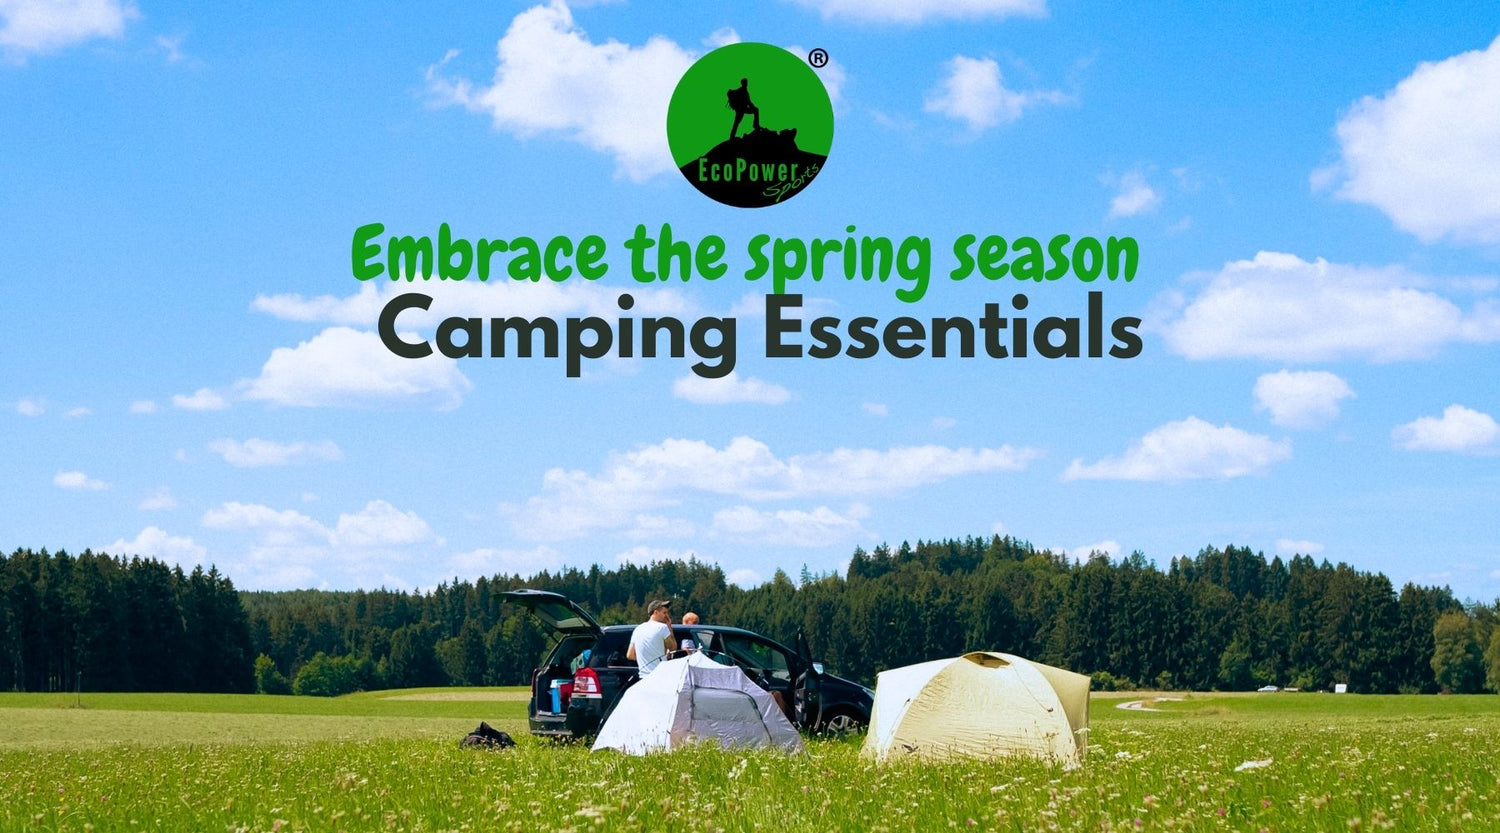 ECOPOWER SPORTS camping essentials, embrace the 2023 spring season exploring the UK great outdoors.